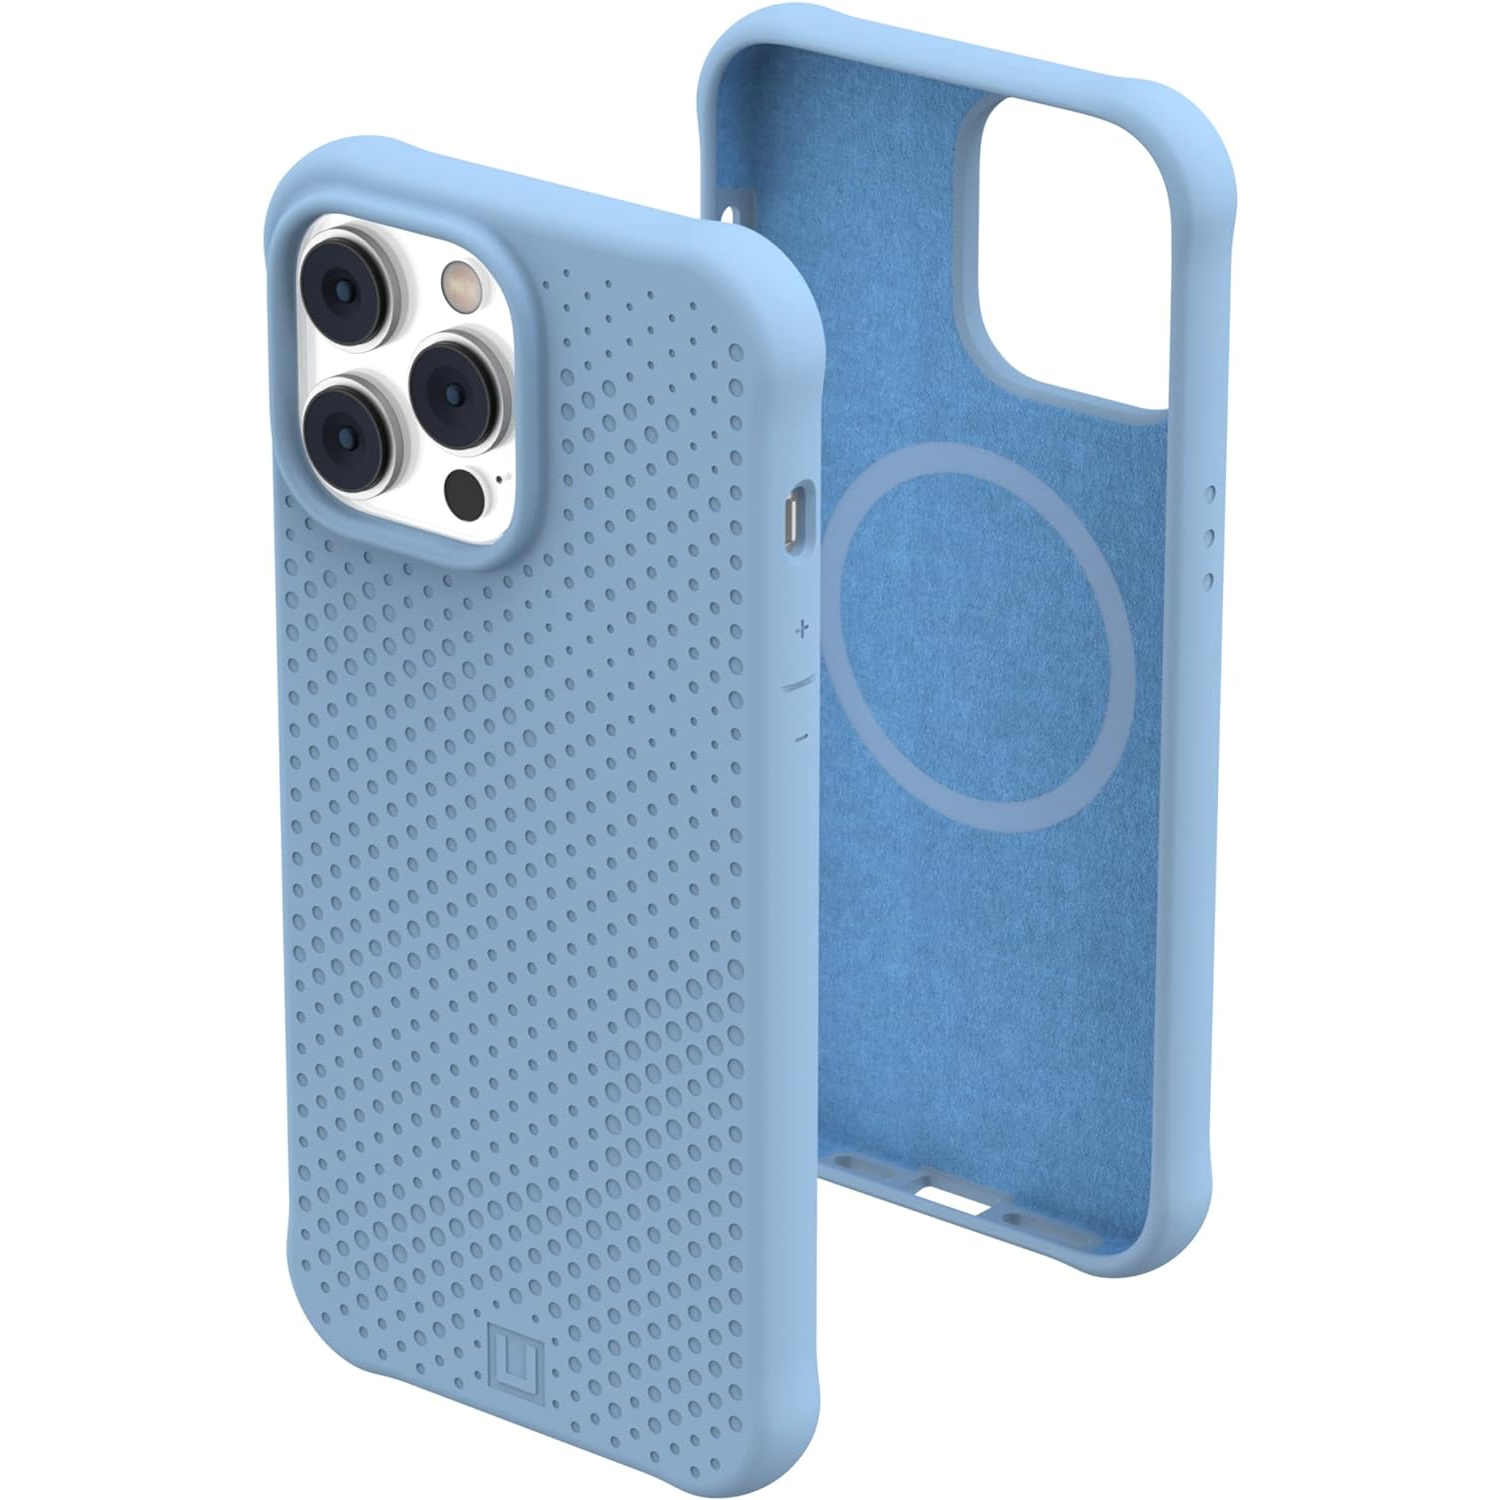 [U] by UAG Designed for iPhone 14 Pro Max Case Blue Cerulean 6.7" Dot Build-in Magnet Compatible with MagSafe Charging